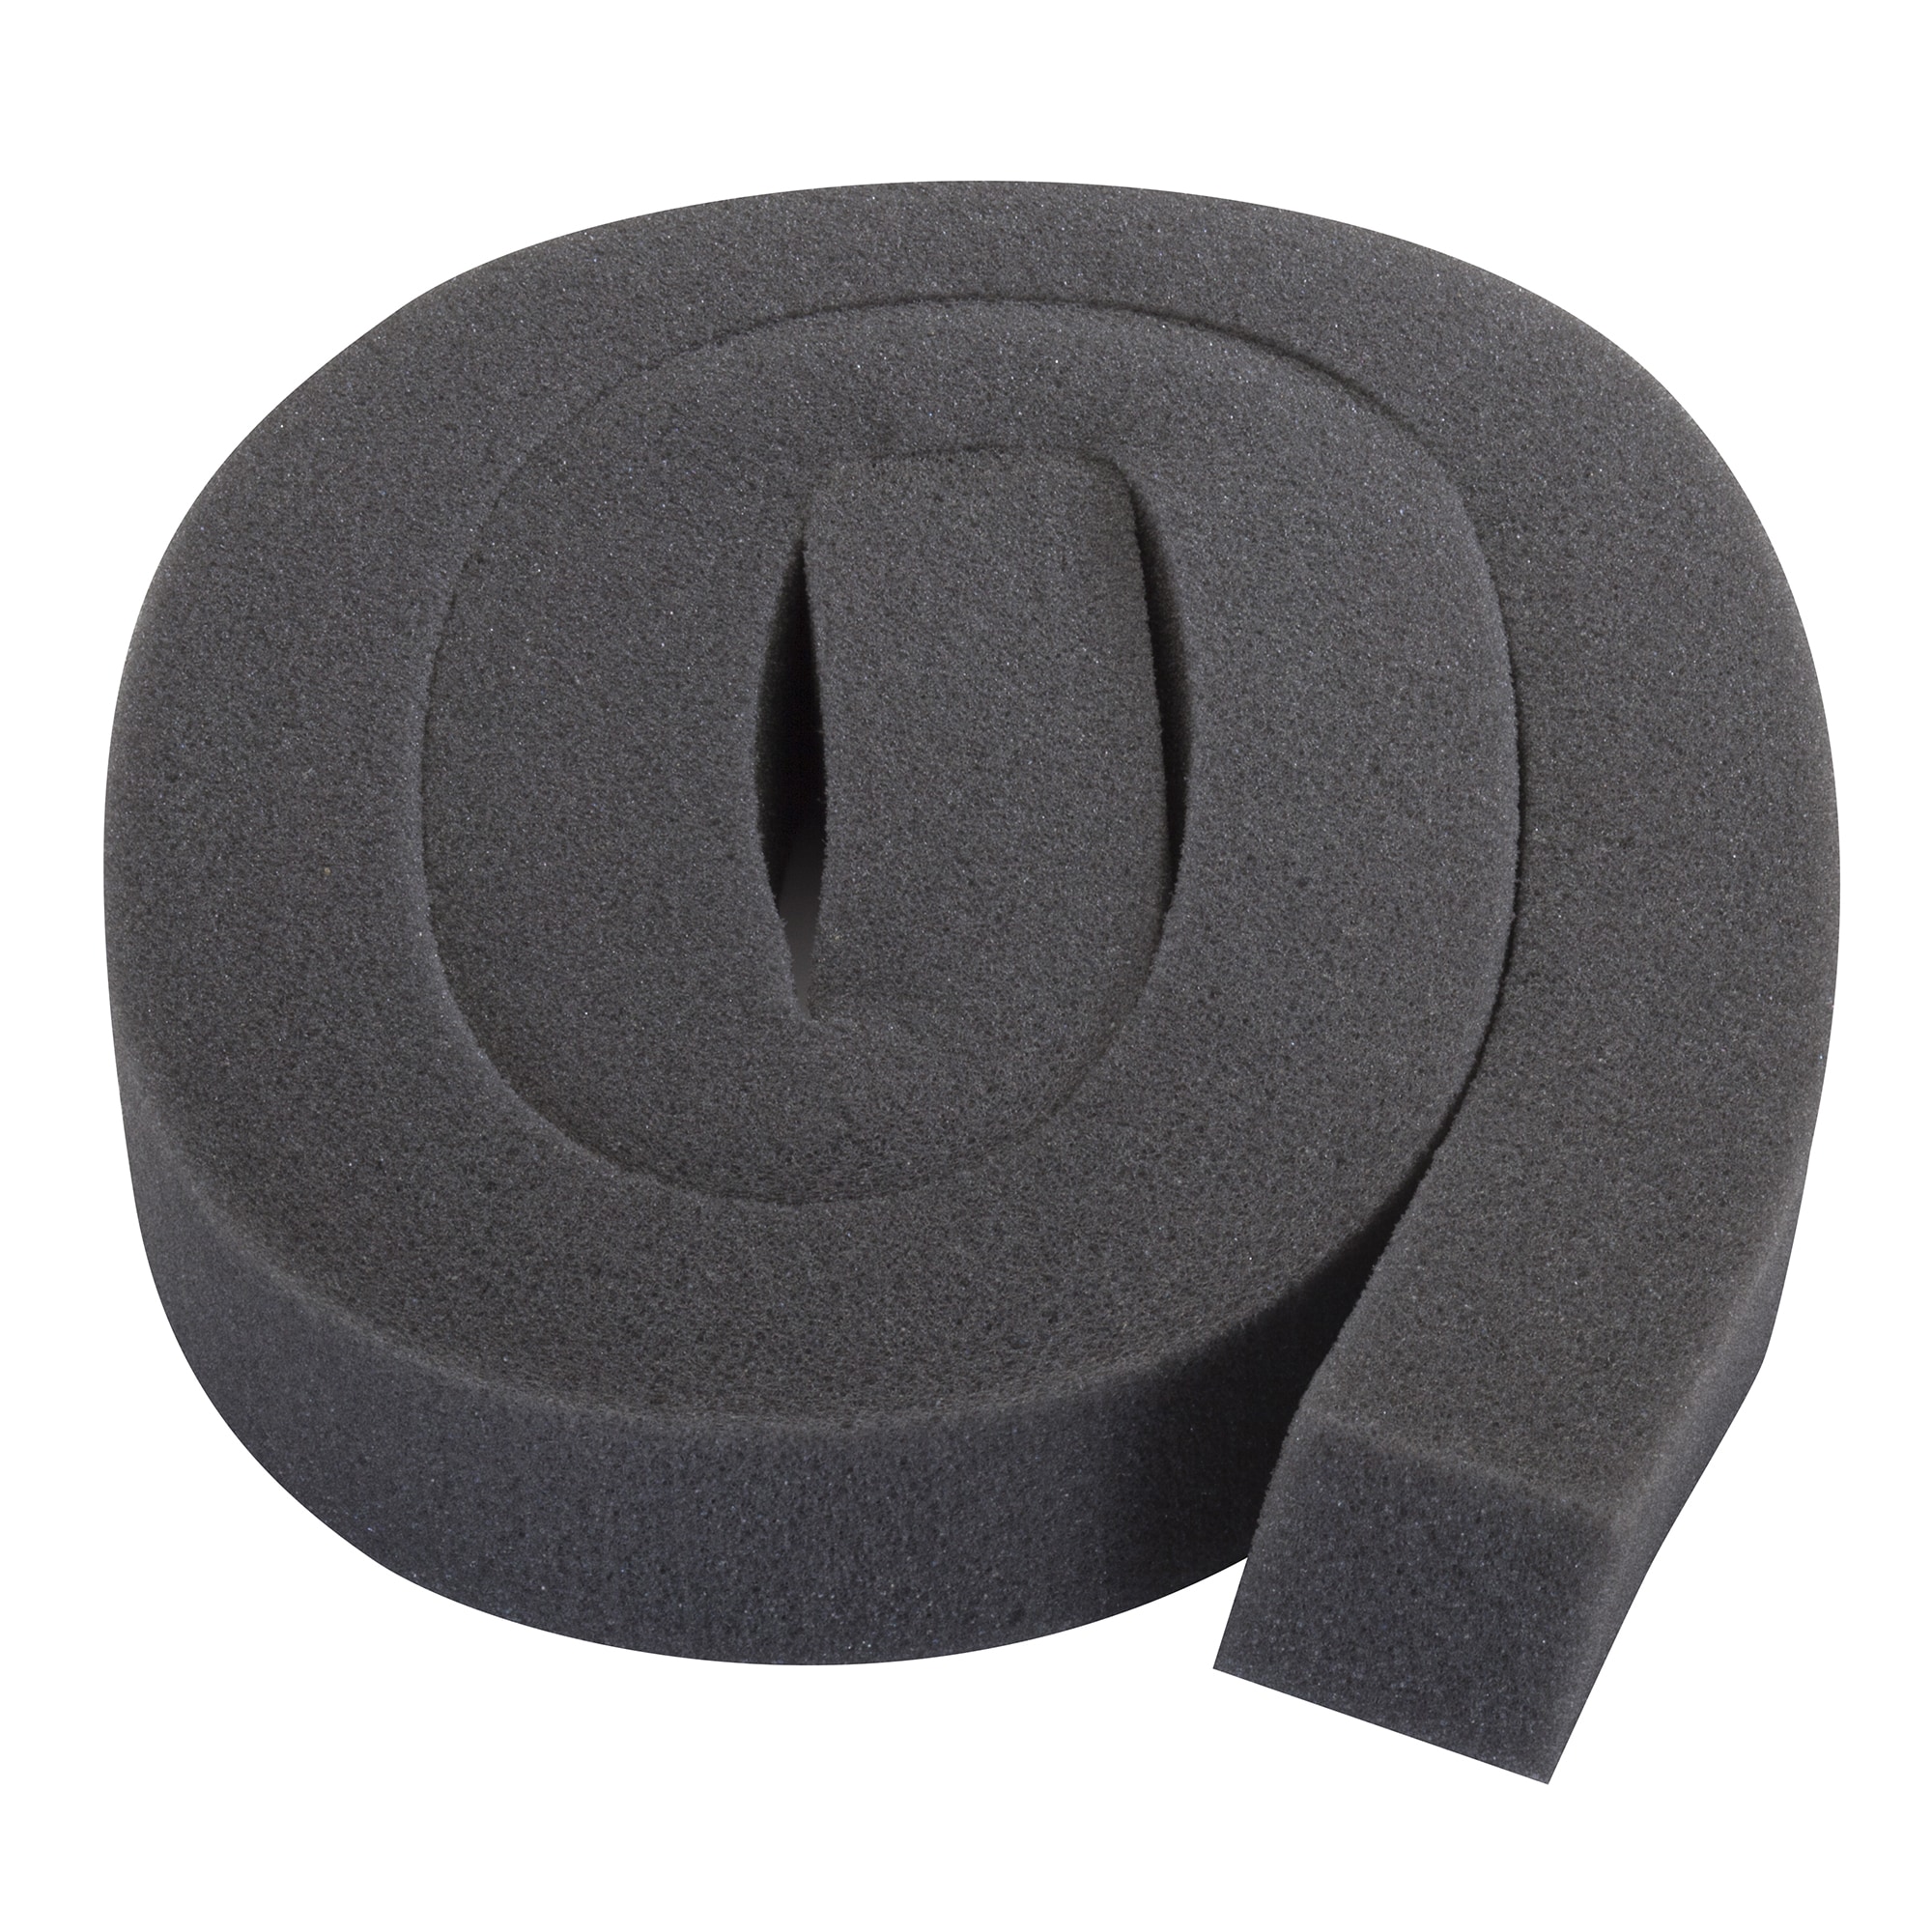 Lefu Open Cell Foam Seal Tape 1 Rolls, 0.38 W X 39 L, Air Conditioner  Side Insulated